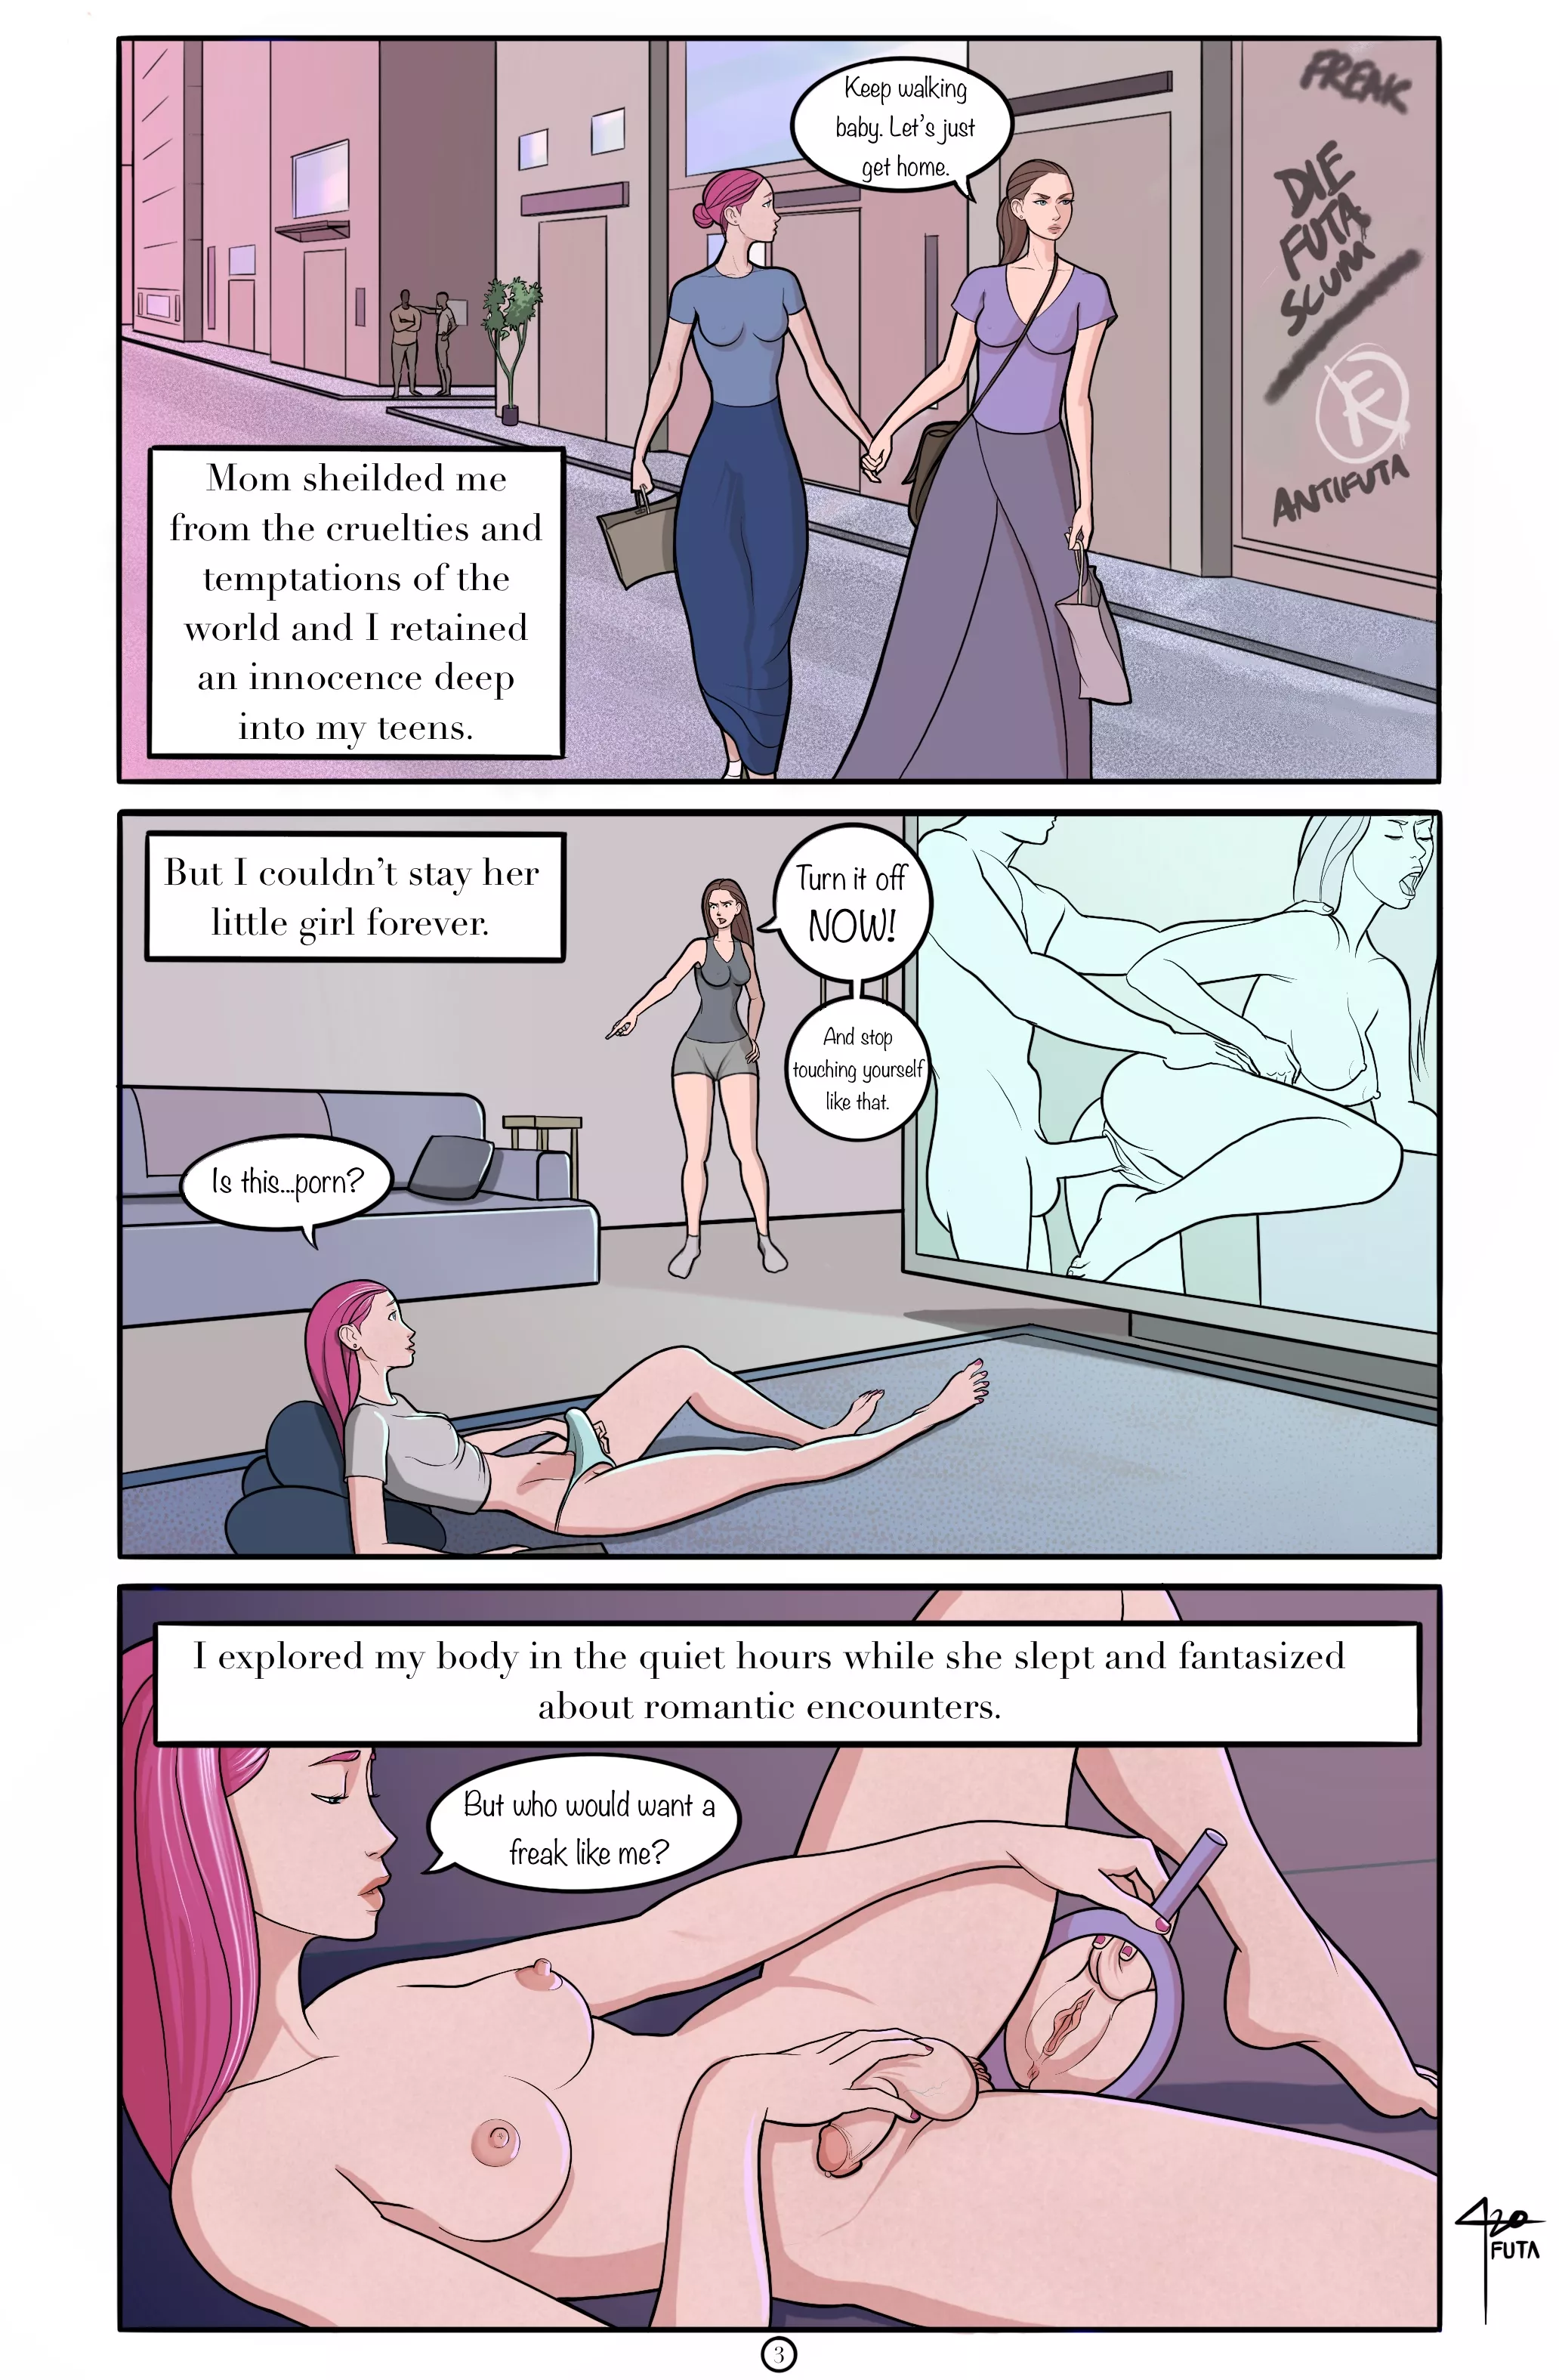 Page 3 from my comic about an innocent futas sexual awakening